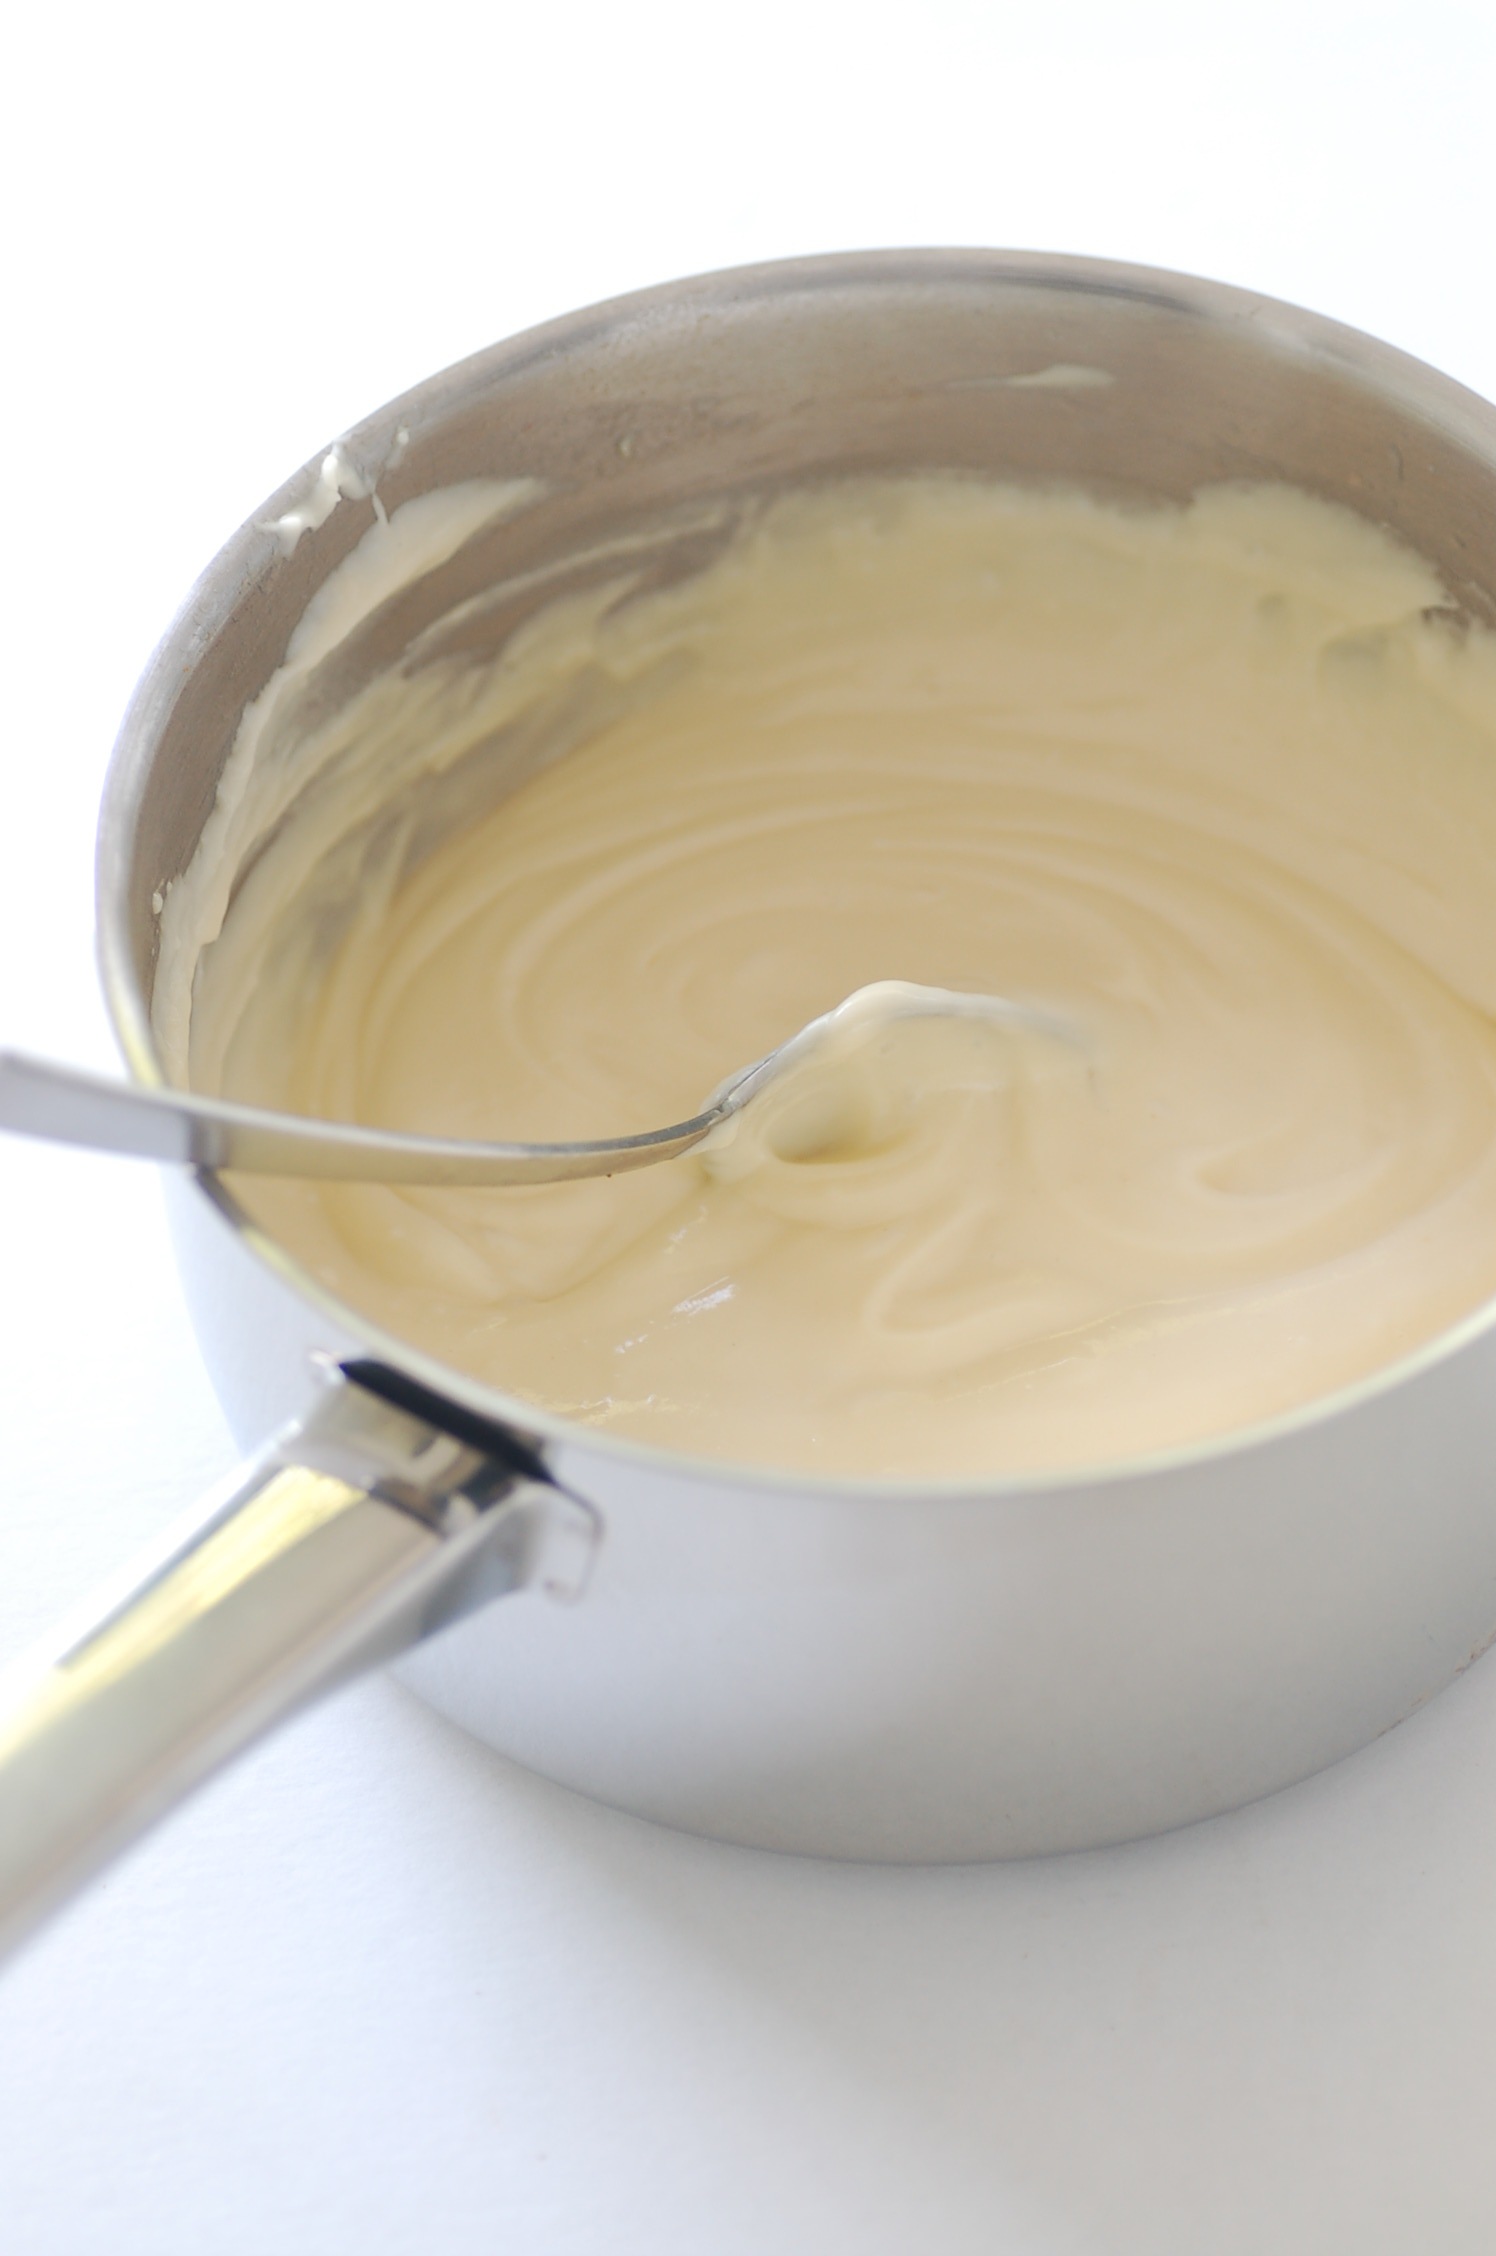 the sauce is made from cream and ready to be eaten